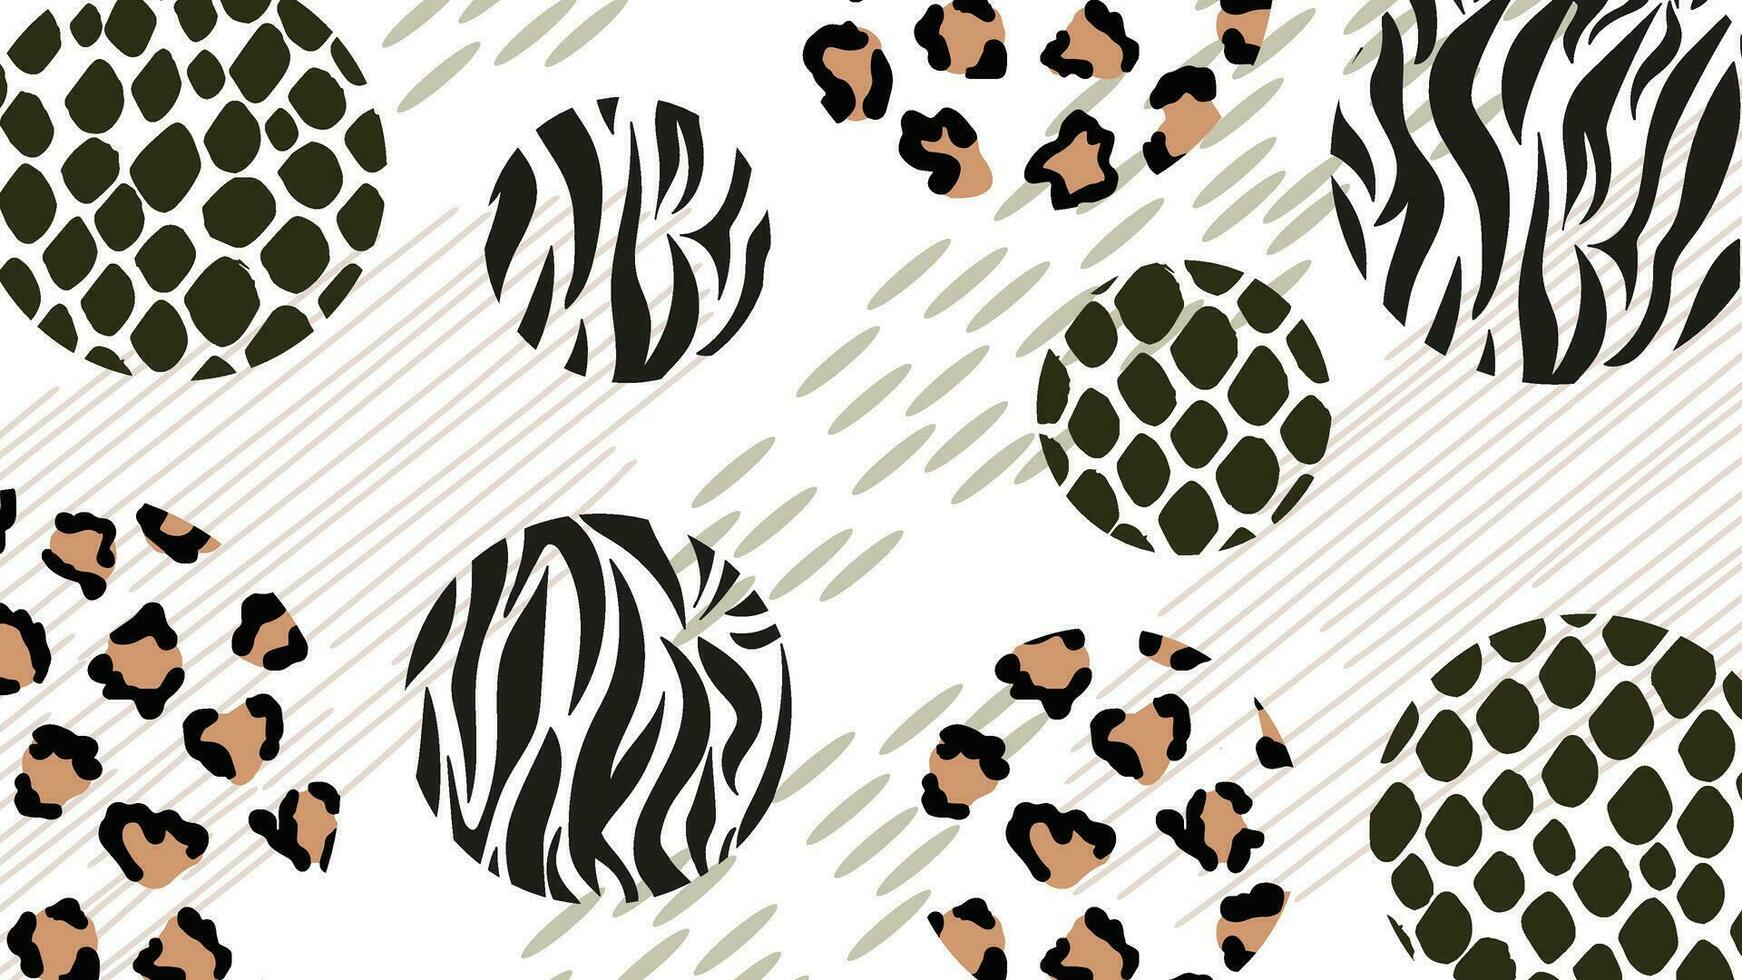 Abstract geometric background of animal fur and skin patterns. Modern patchwork style. Collage of zebra, snake, leopard patterns in circles. Vector. For fabric print, clothes, covers, textiles vector